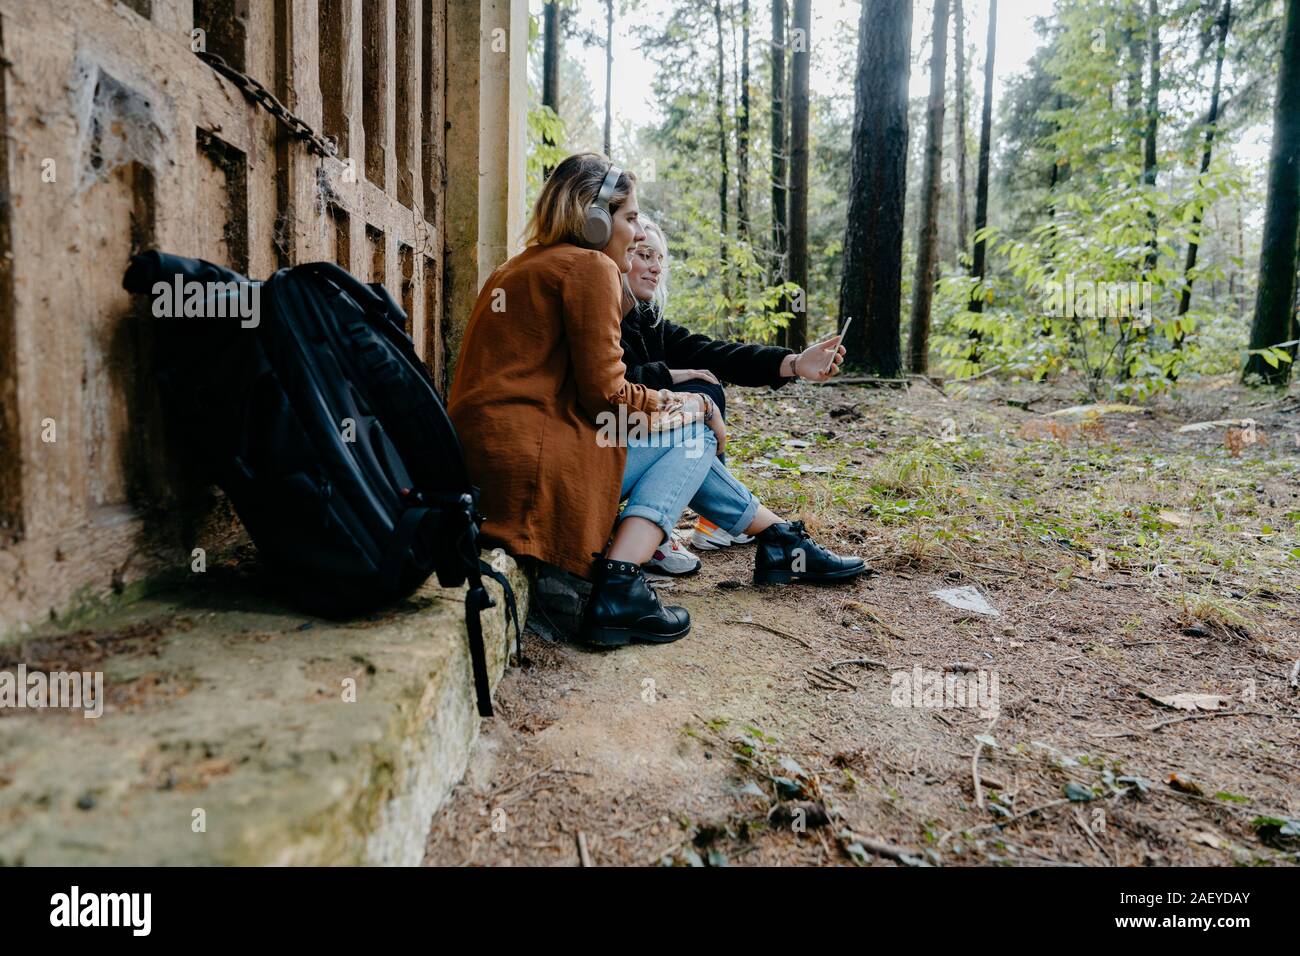 Women streaming video on their smartphone in a remote forest Stock Photo